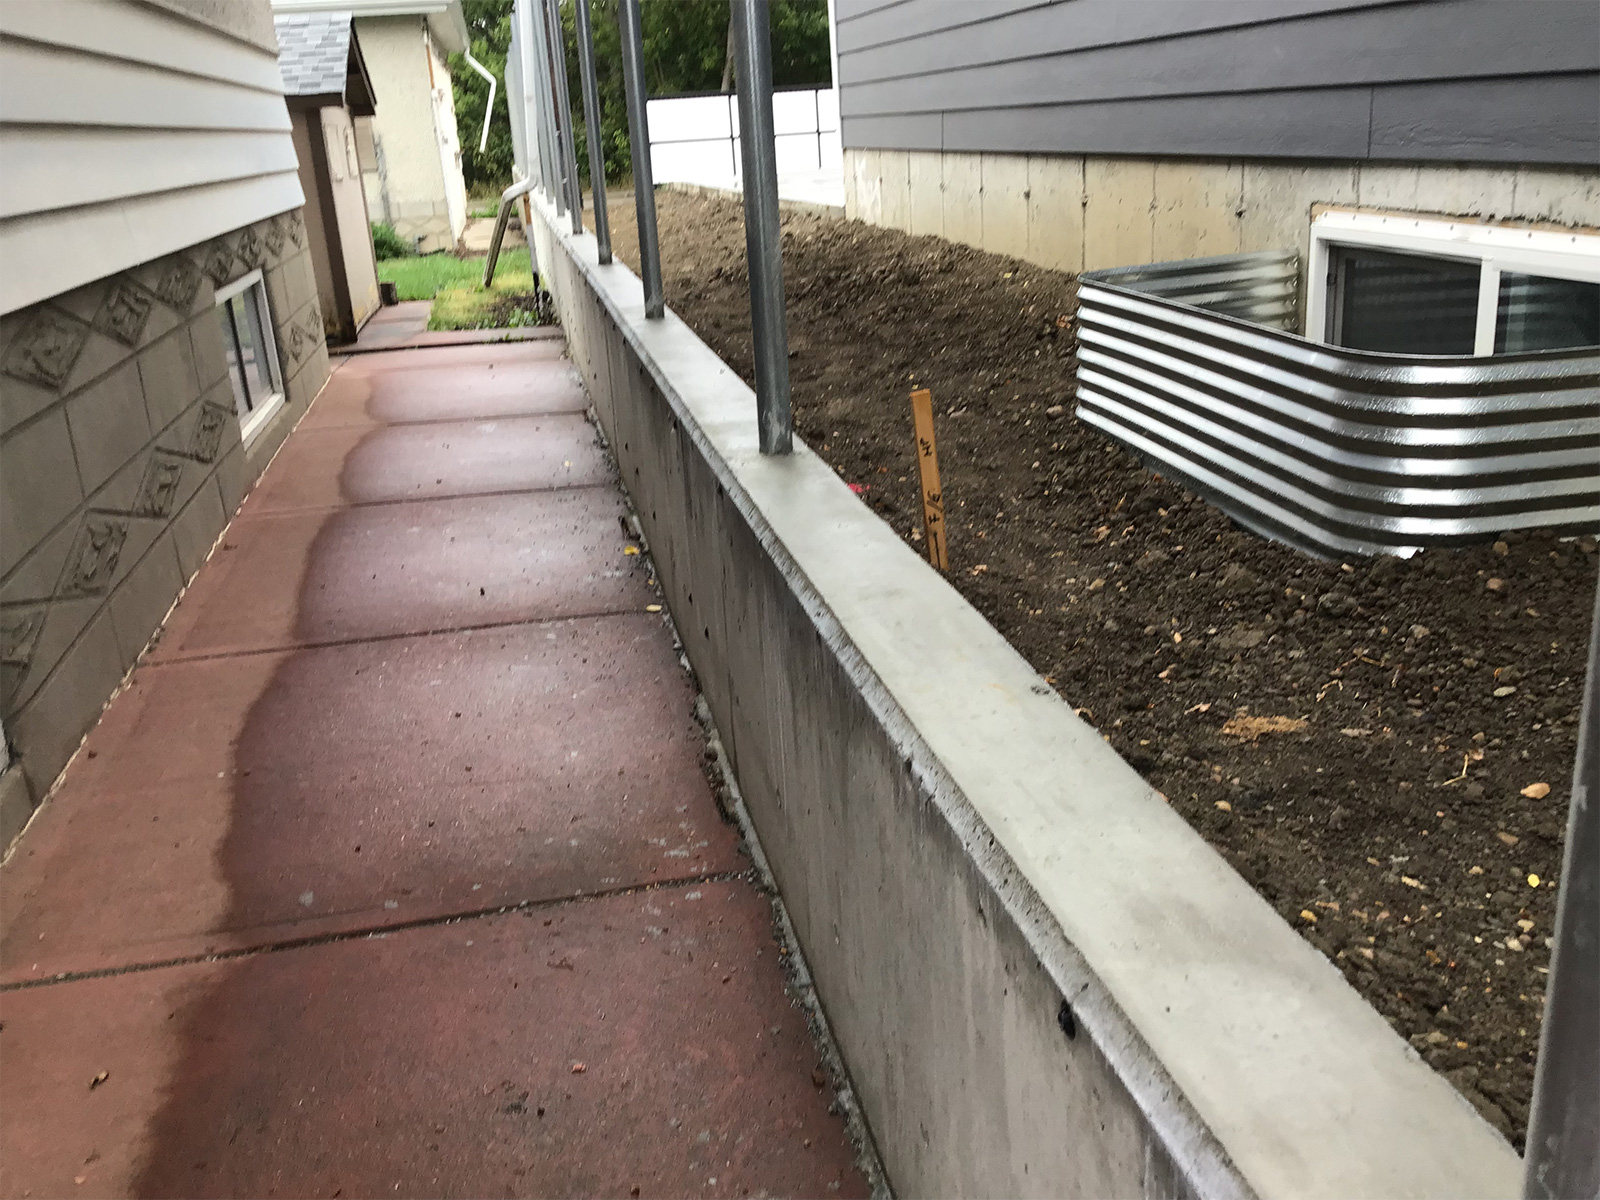 Concrete retaining wall and a proposed new fence